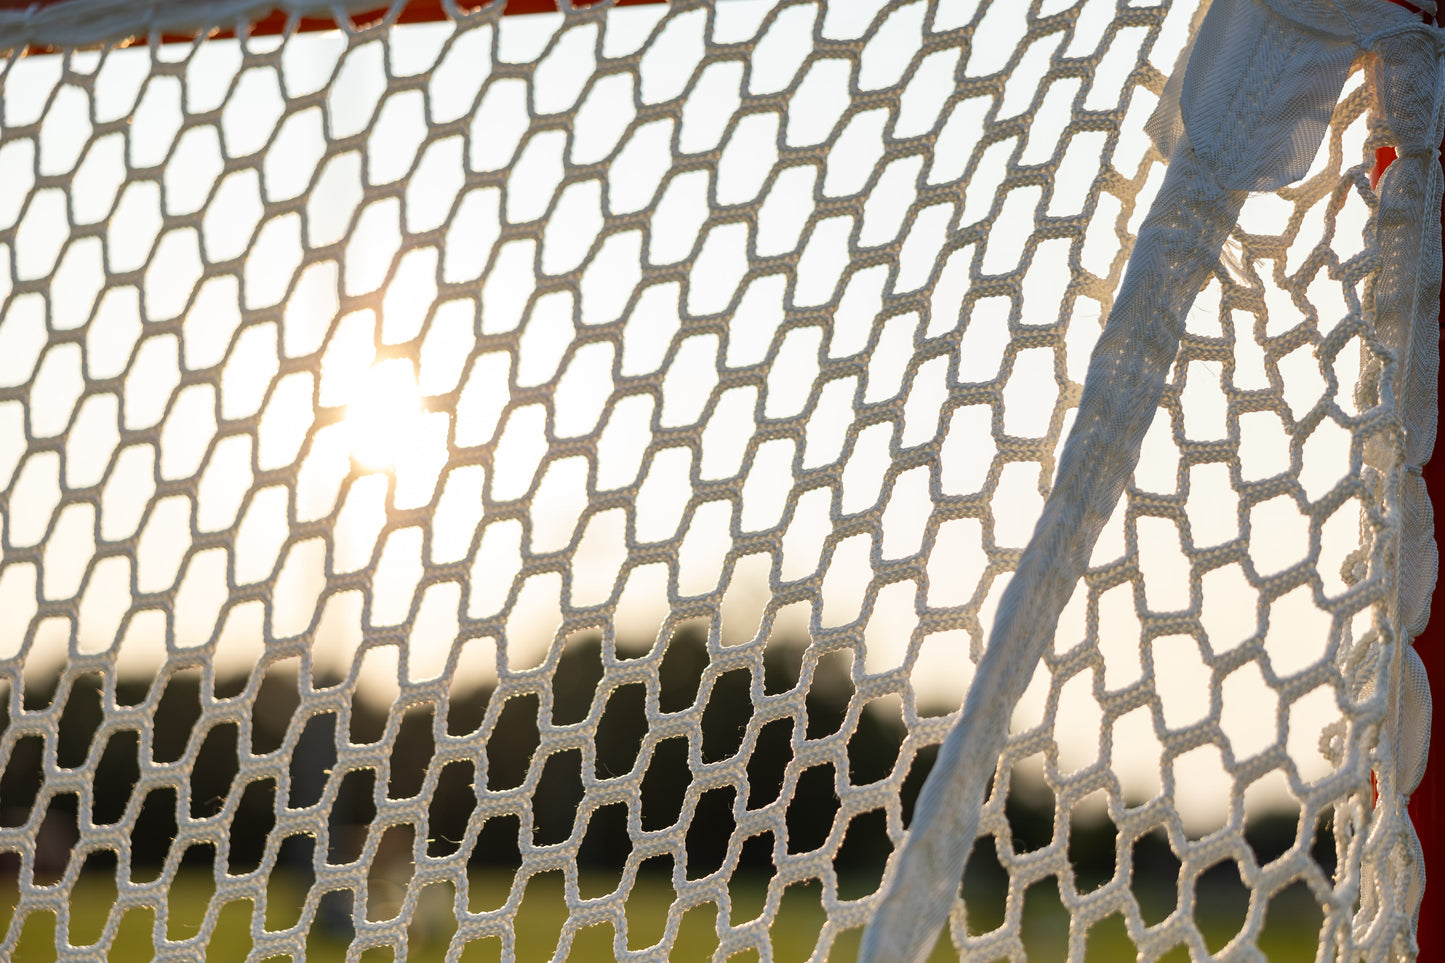 NEW! 6mm or 7mm STINGER 'Hexagon' Lacrosse Replacement Net, 6x6x7, Available in White & Black, 120 ft Lacing Cord & Bungees, by Crankshooter® USA LACROSSE/NCAA APPROVED (DOUBLE LIFESPAN) - FREE SHIPPING